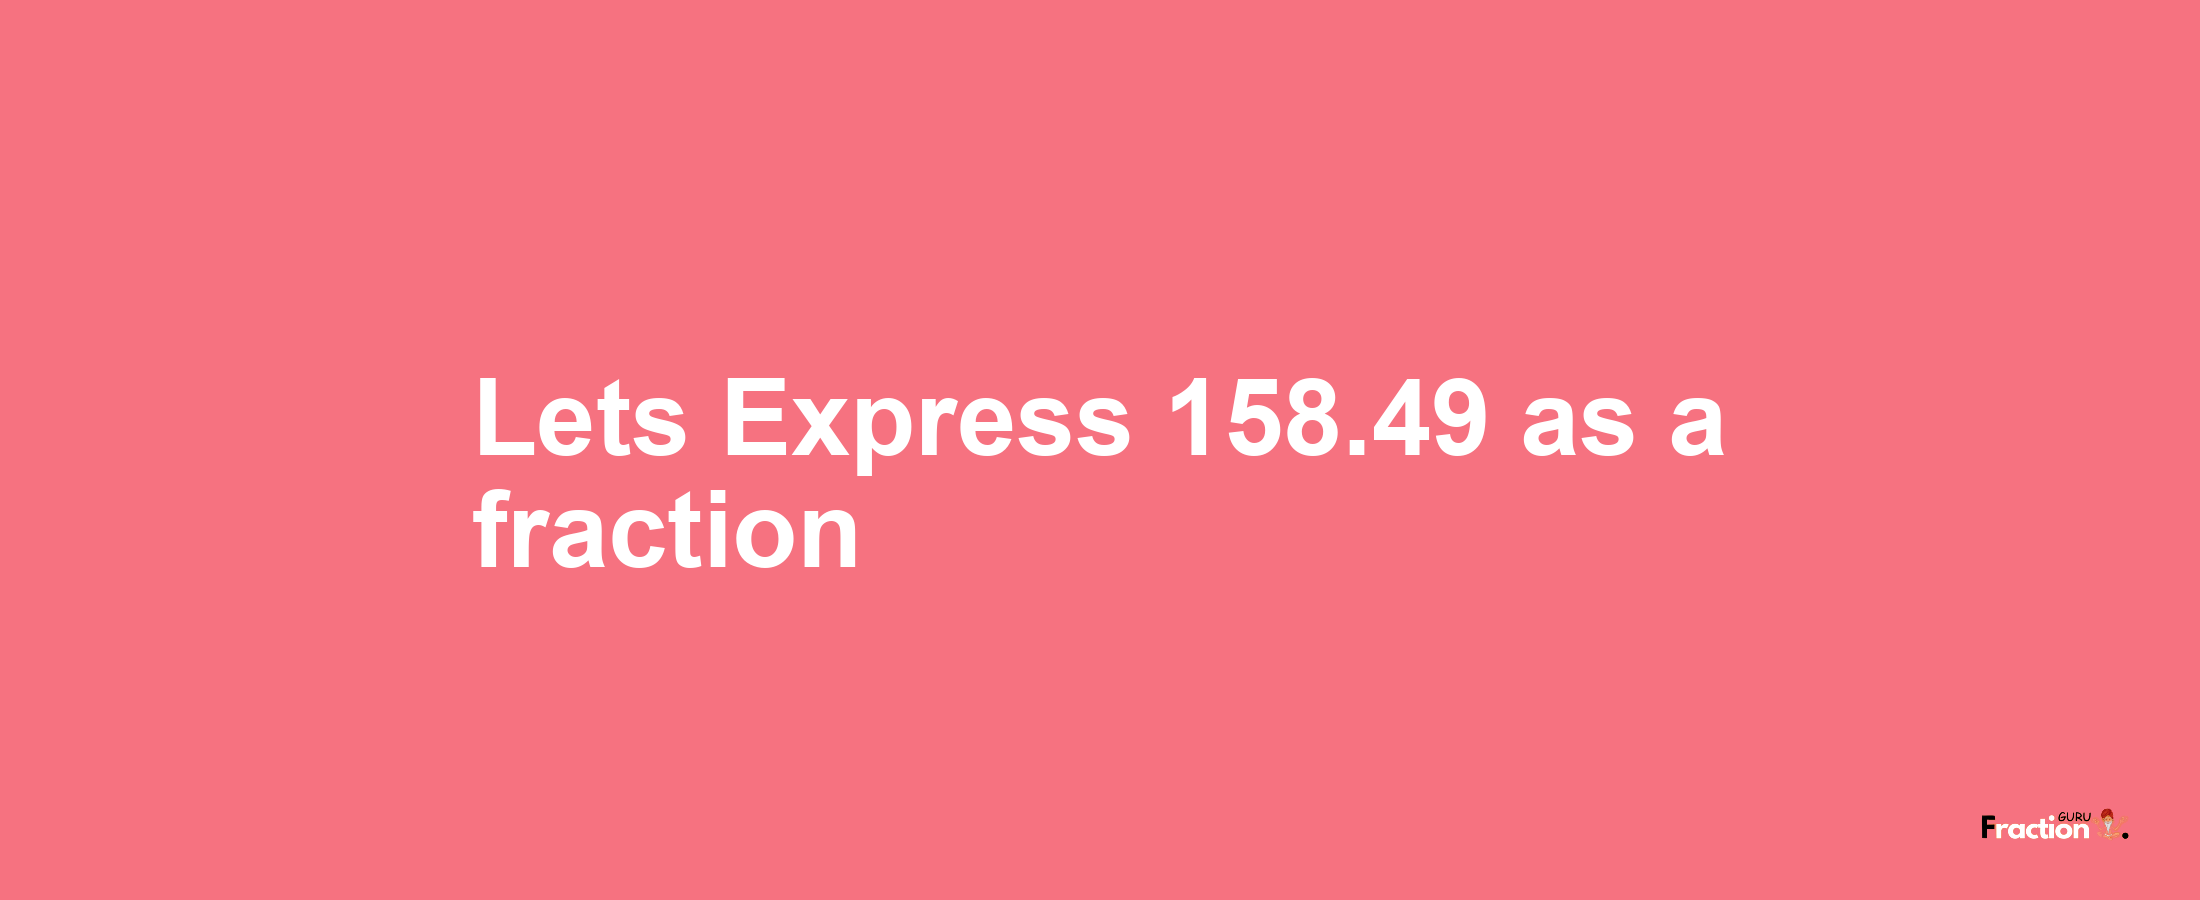 Lets Express 158.49 as afraction